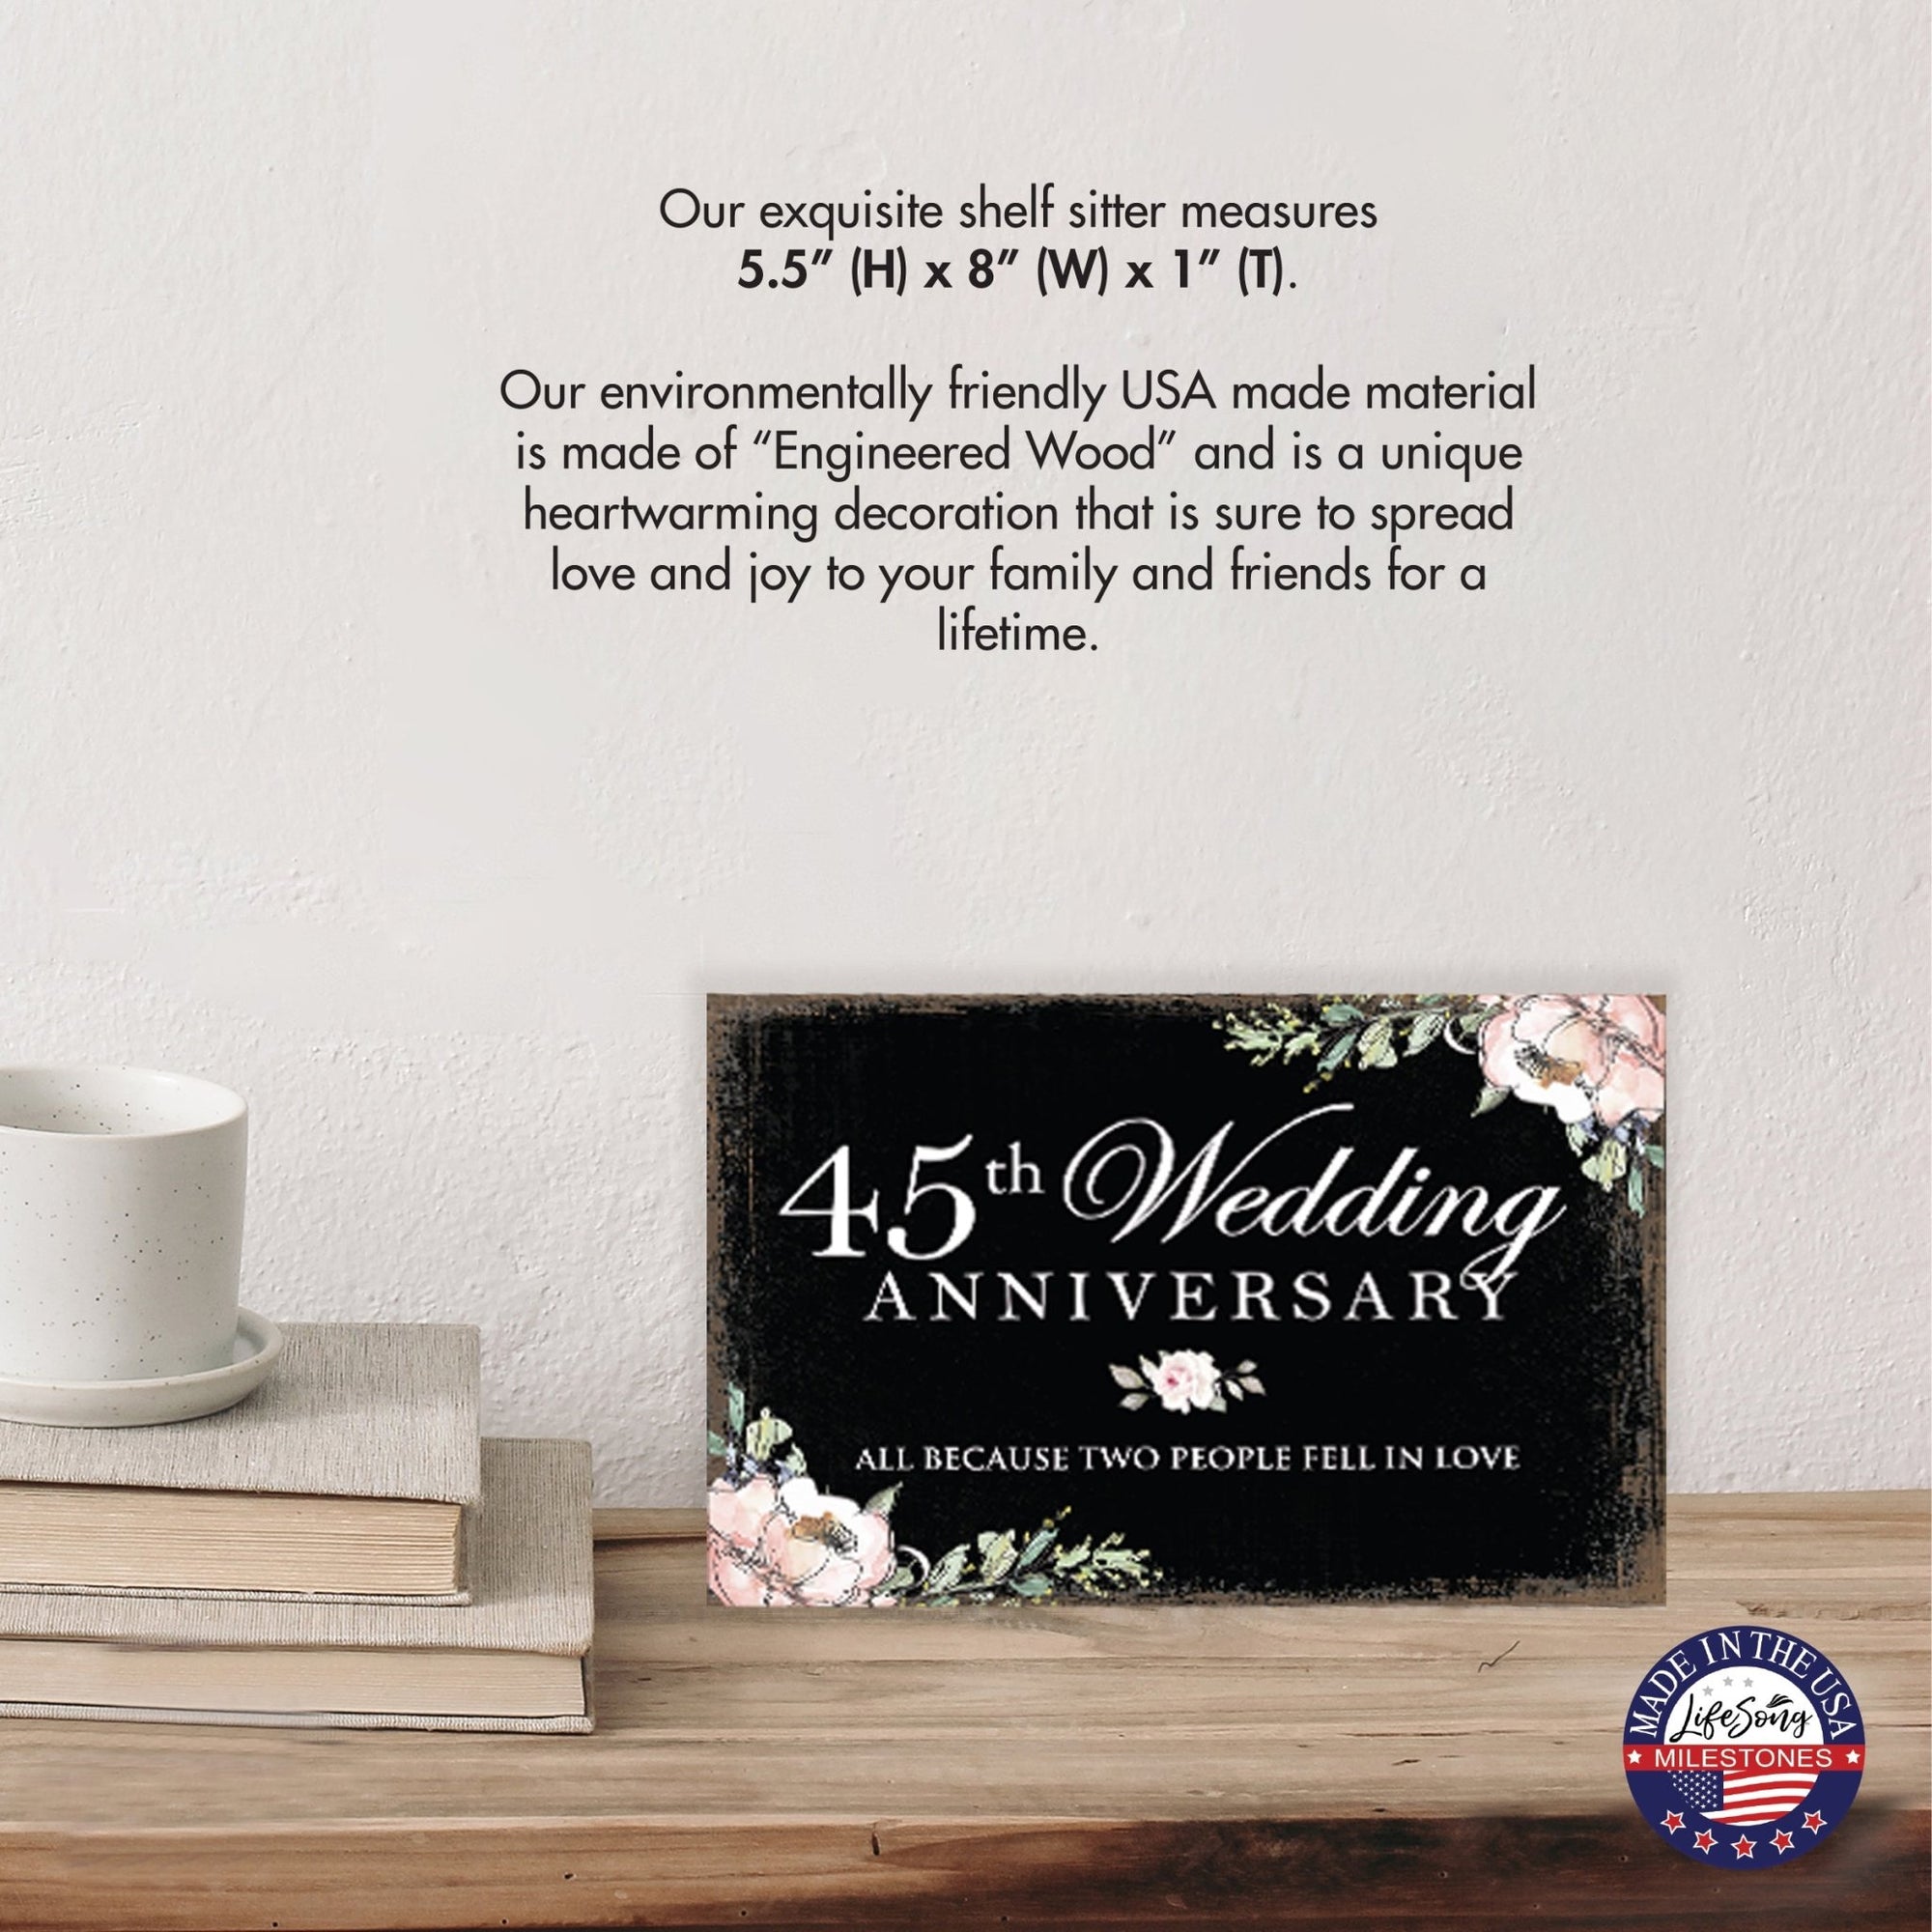 45th Wedding Anniversary Unique Shelf Decor and Tabletop Signs Gift for Couples - Fell In Love - LifeSong Milestones